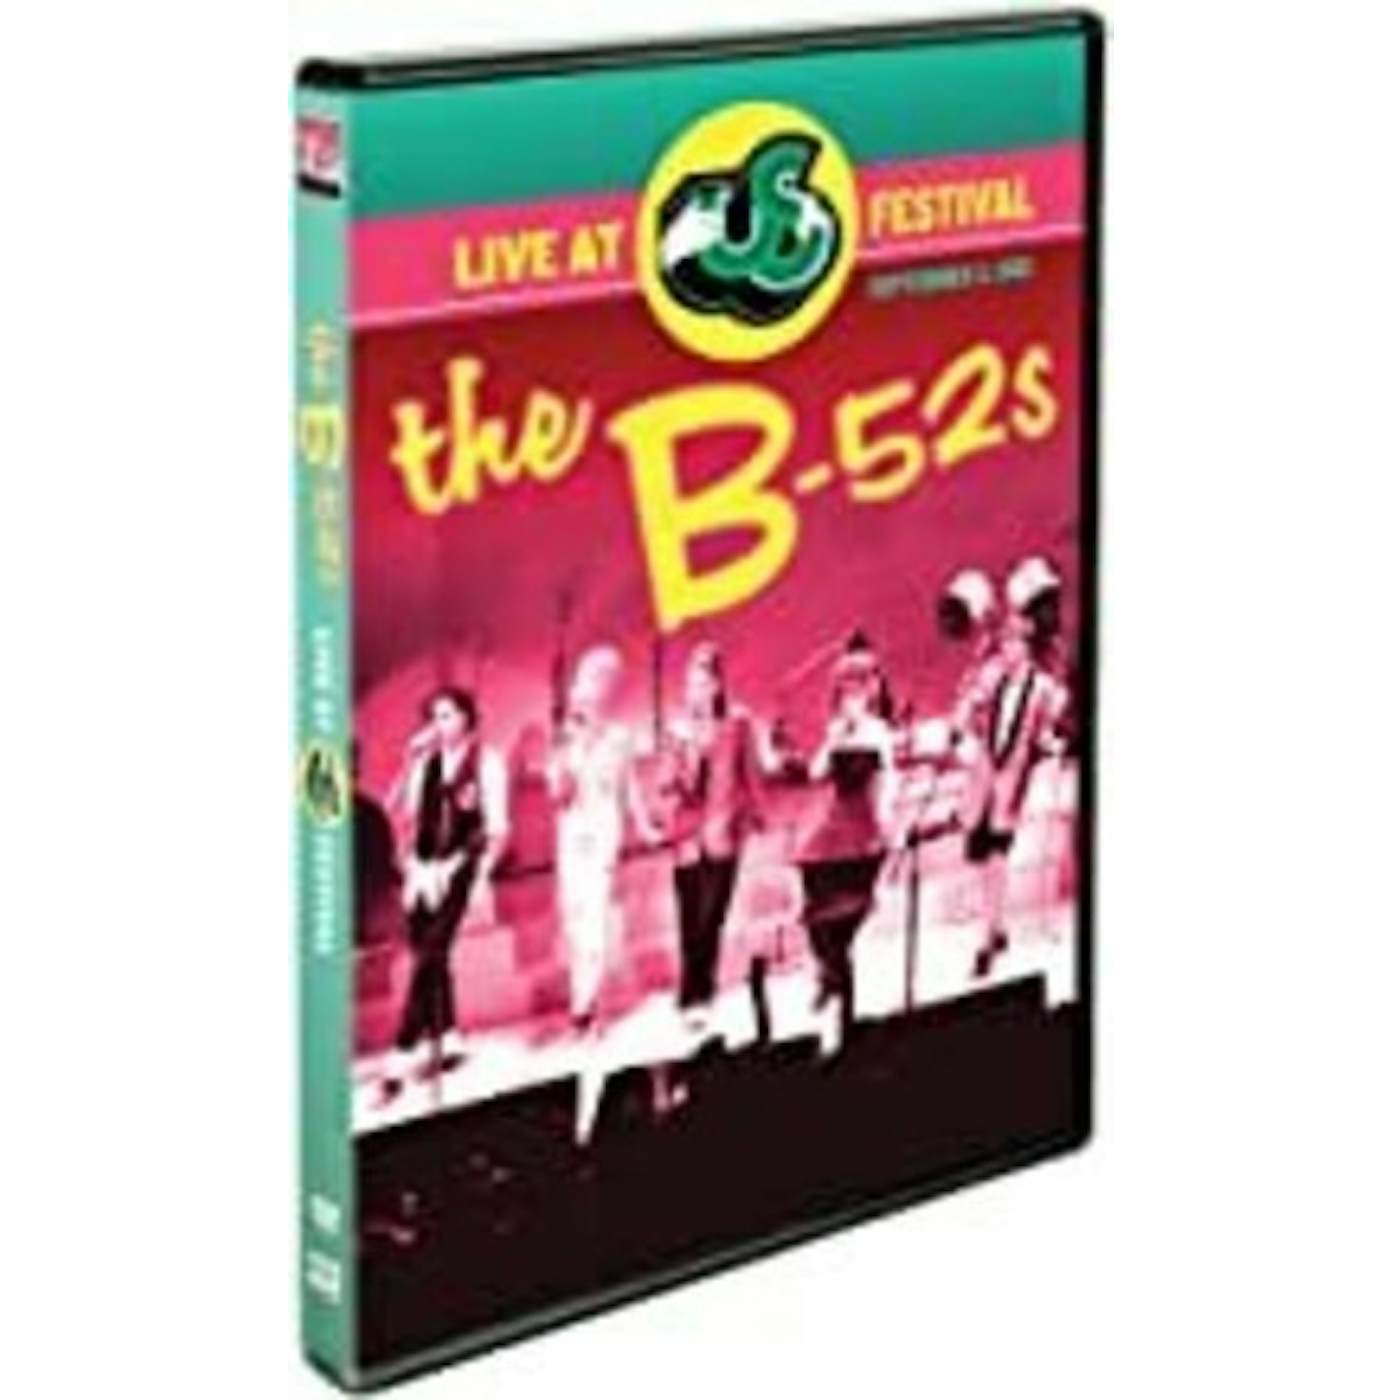 The B-52's: LIVE AT US FESTIVAL DVD